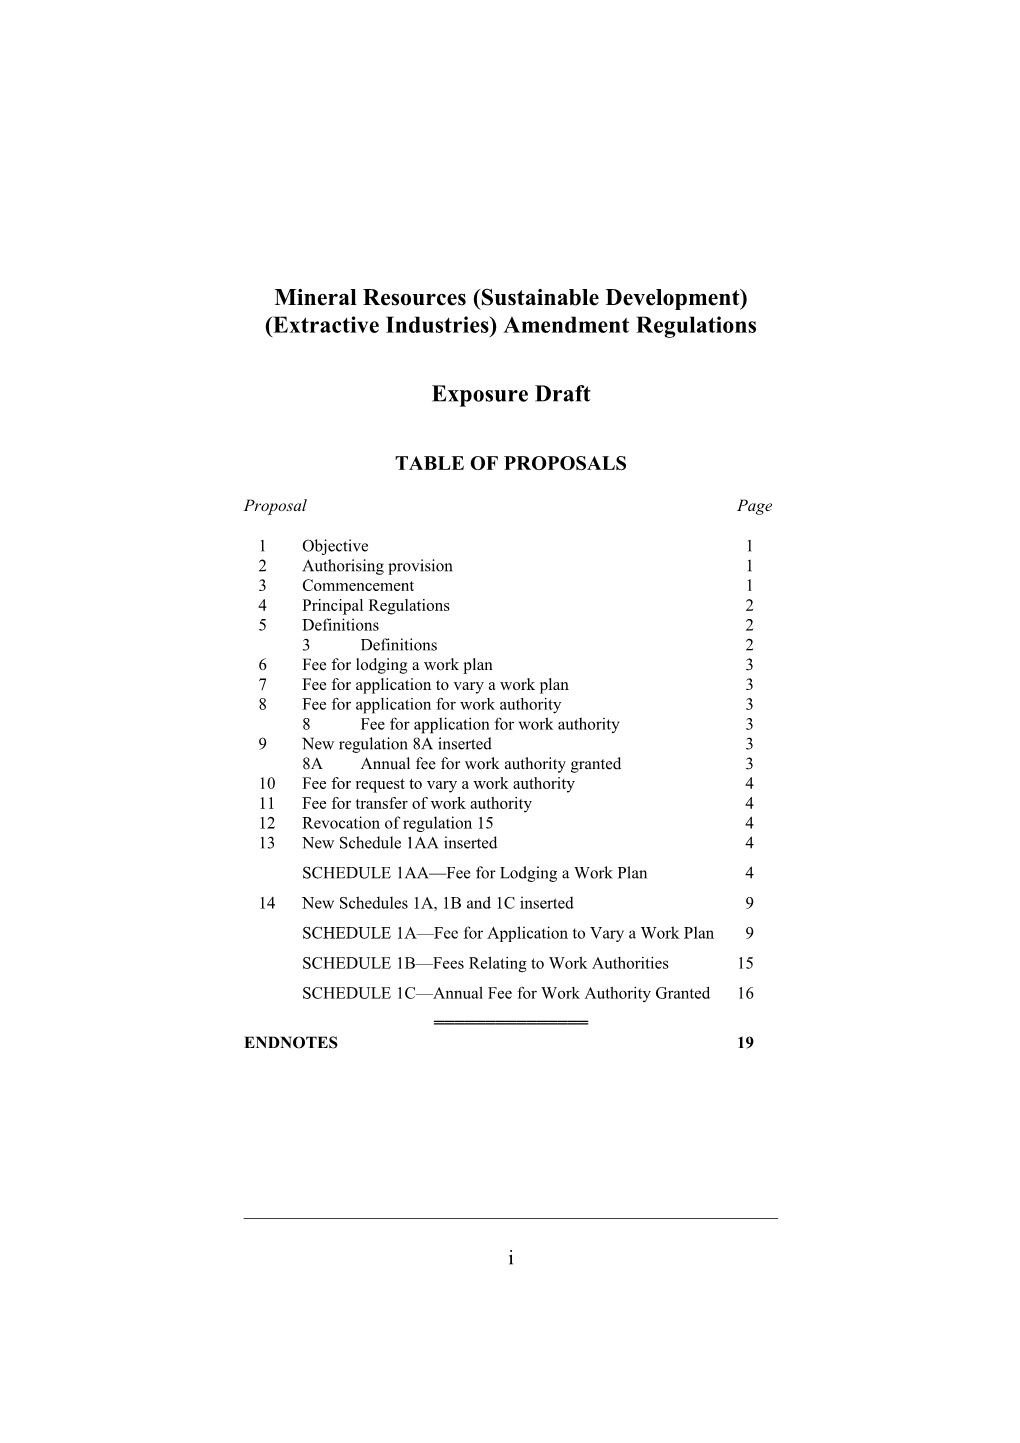 Mineral Resources (Sustainable Development) (Extractive Industries) Amendment Regulations 2014